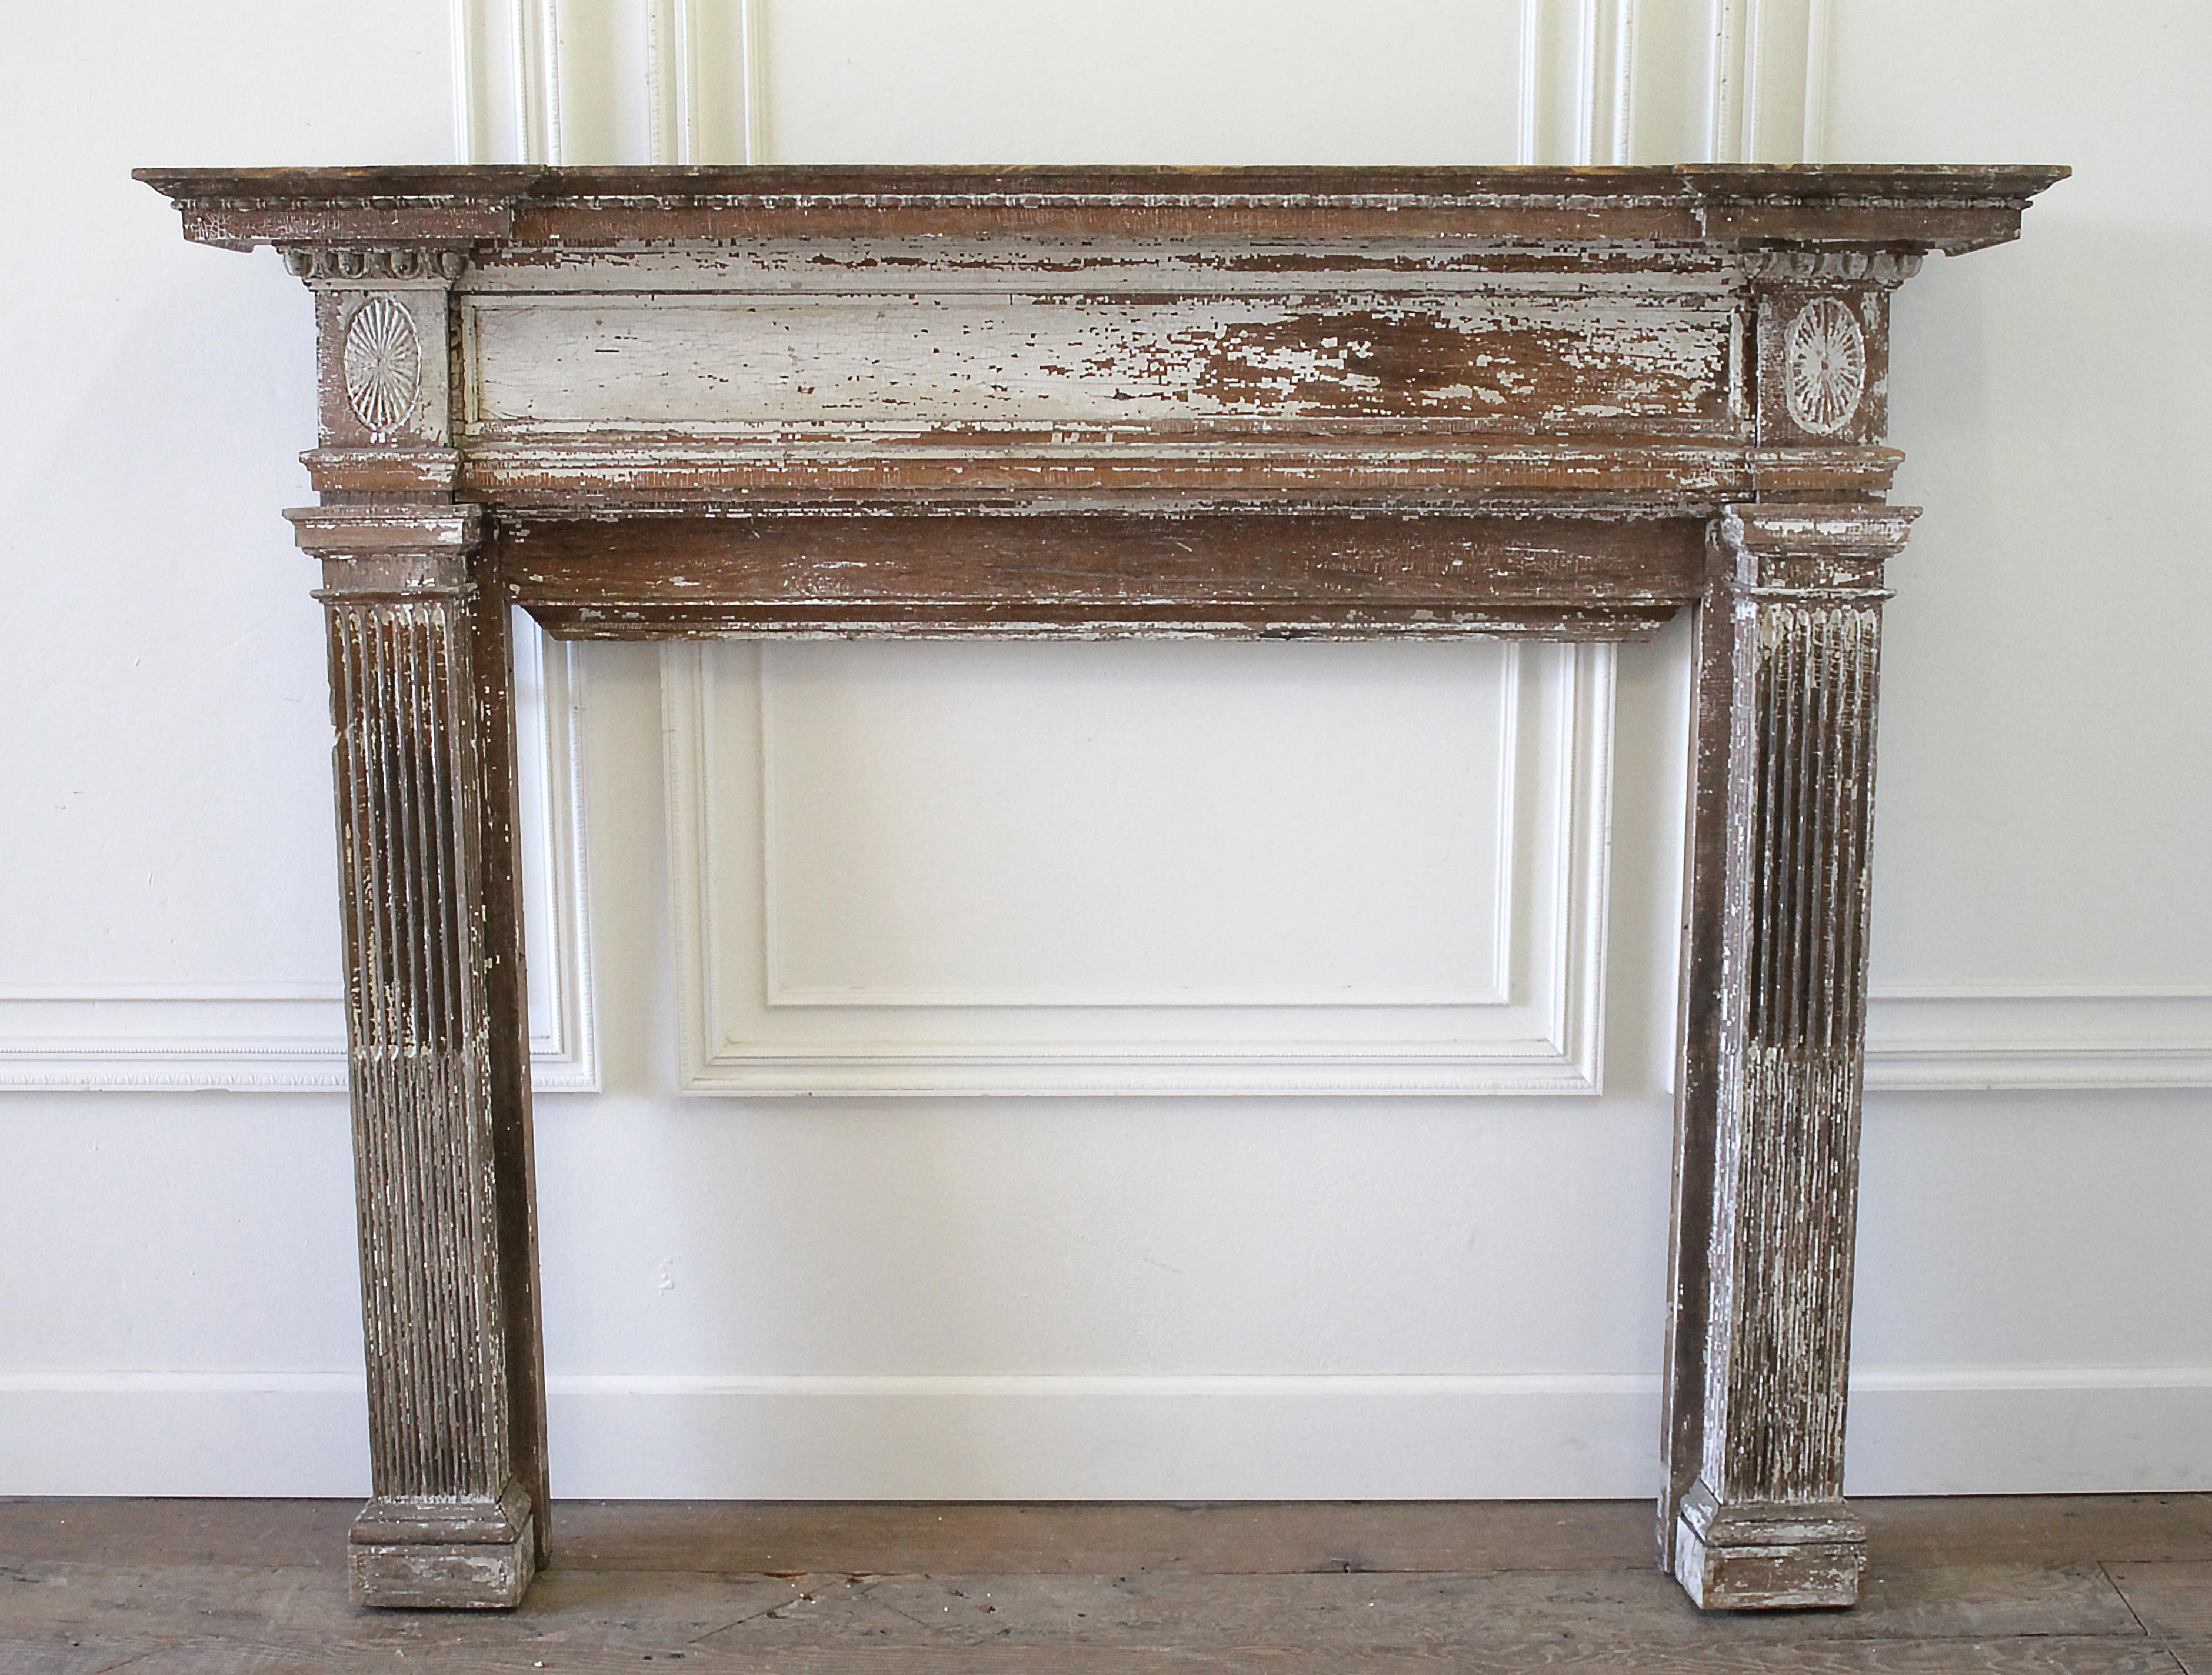 19th century antique architectural salvage mantle
Original finish, creamy white chippy paint. The mantle is made from two different types of wood, very solid, with lots of decorative details. The inside trim for the opening is missing on the sides,